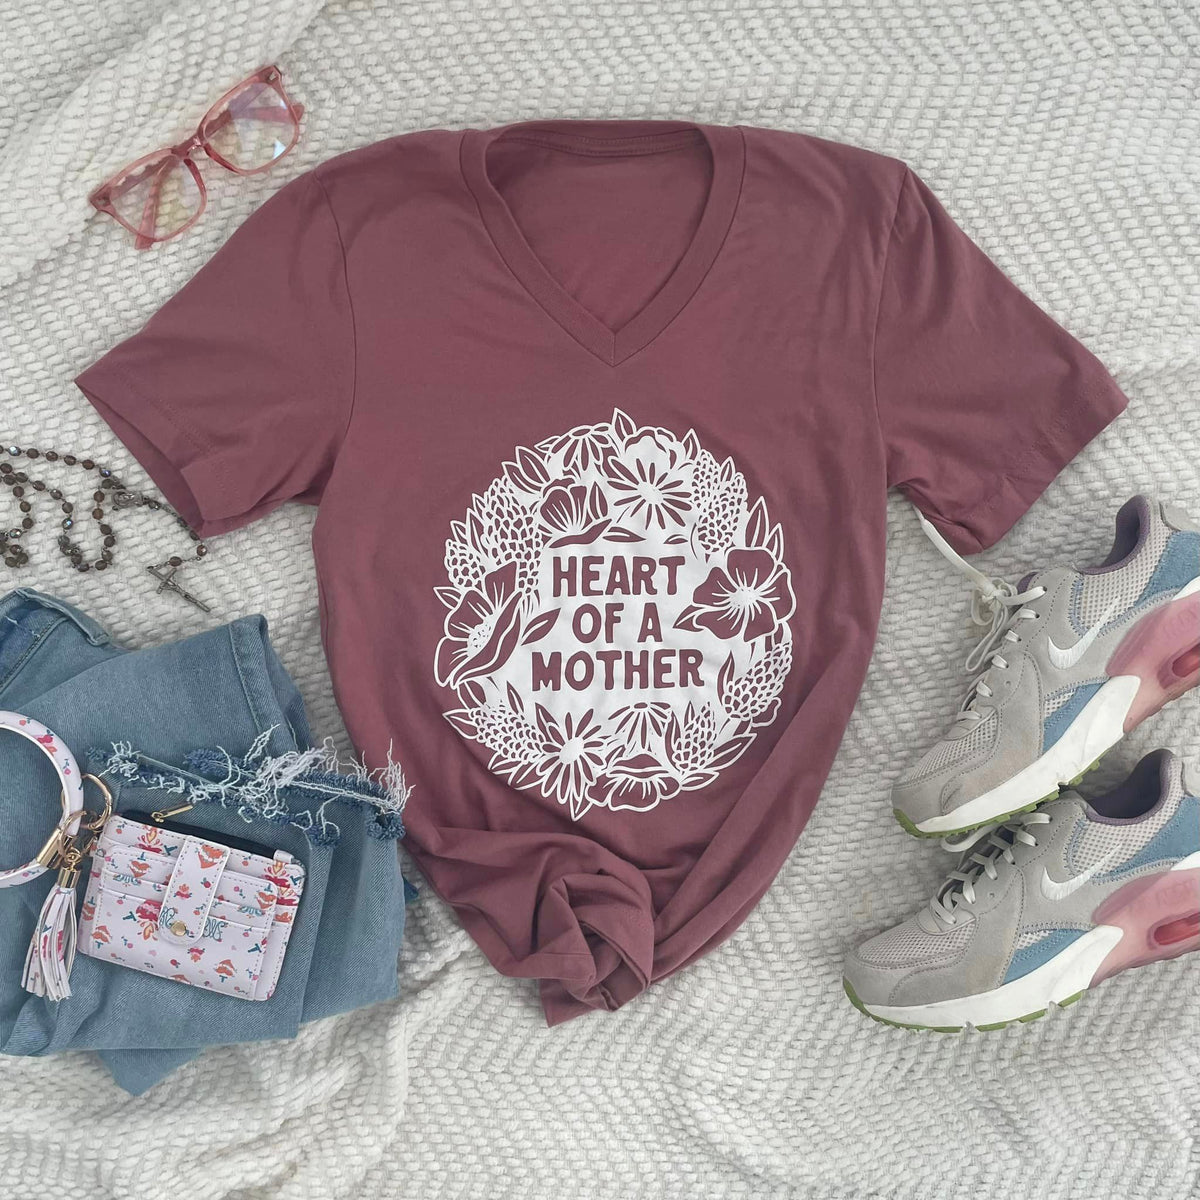 Heart of a Mother - Saint Therese of Lisieux Tee